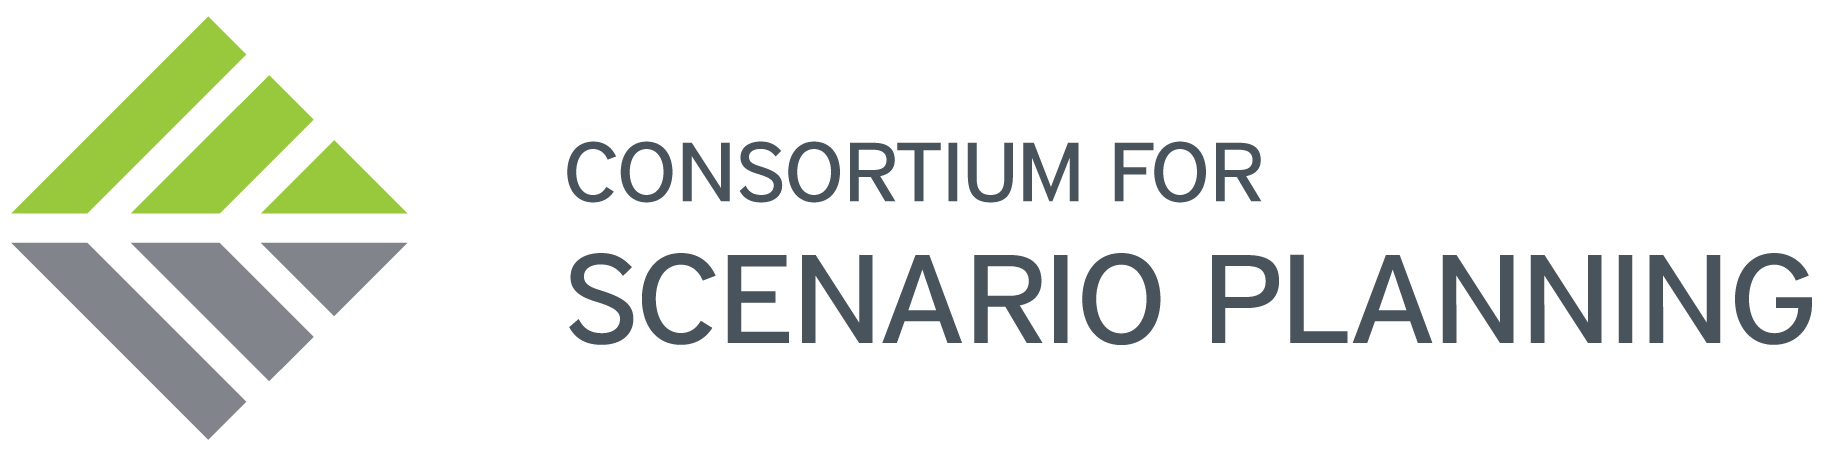 consortium logo with title written out